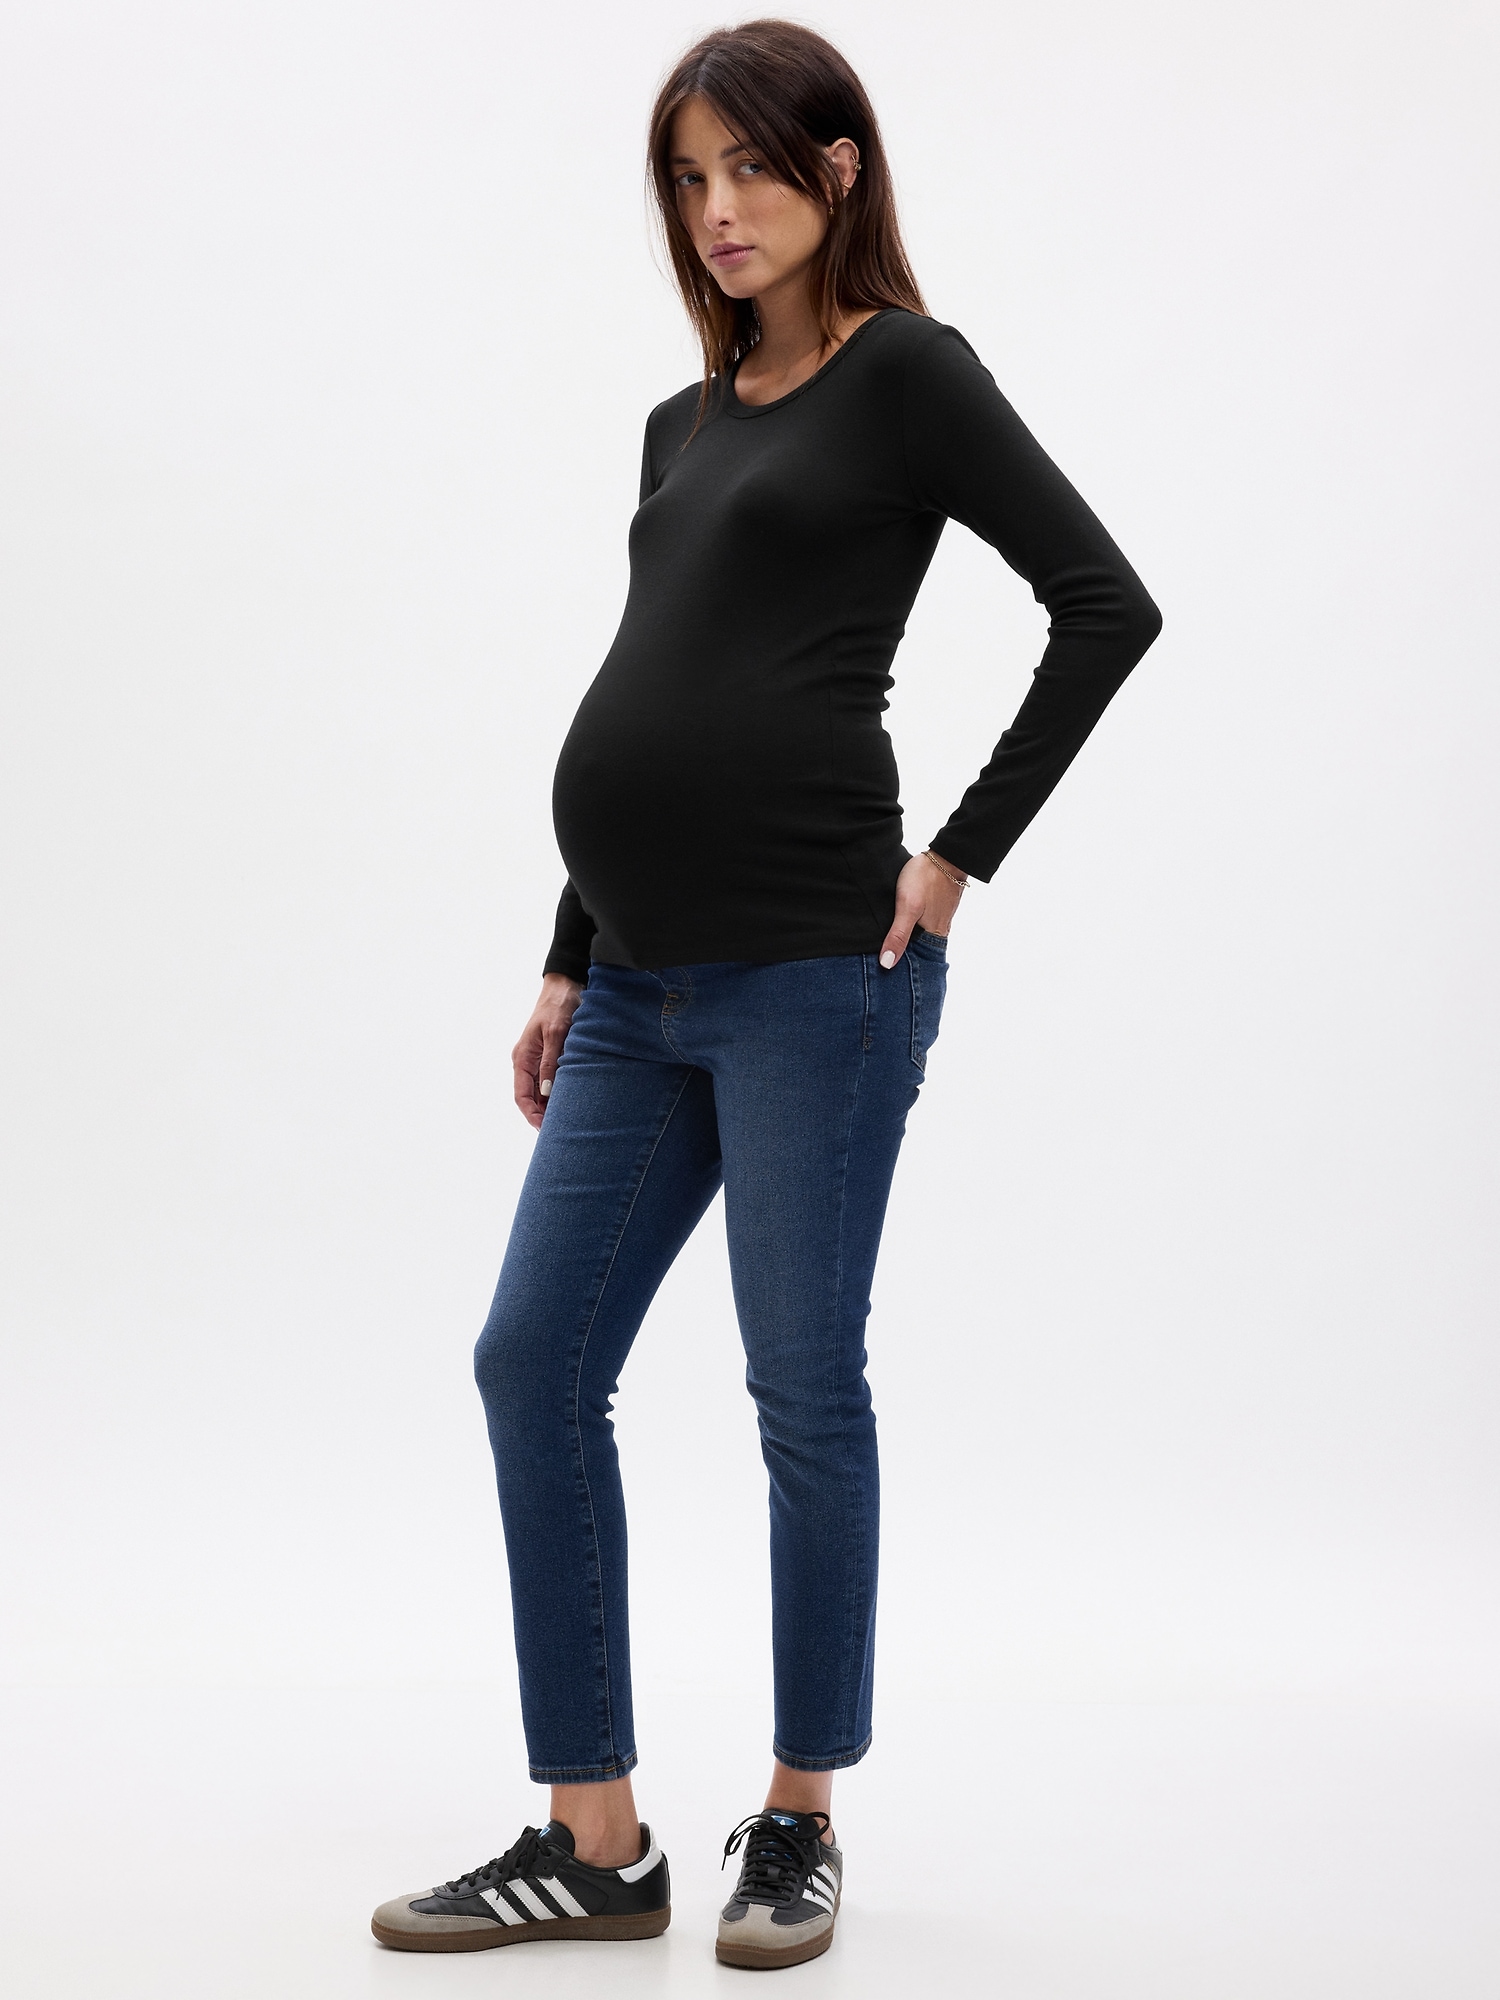 Maternity Jeans By Time And Tru Size: Xxl